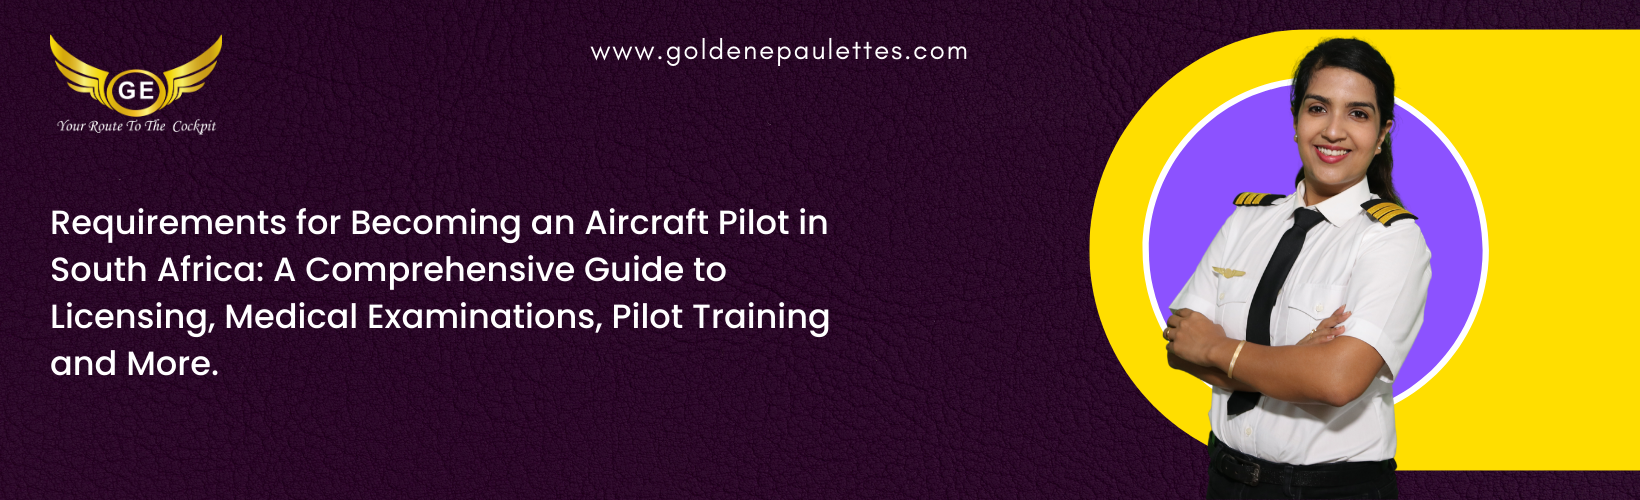 Requirements for Becoming an Aircraft Pilot in South Africa